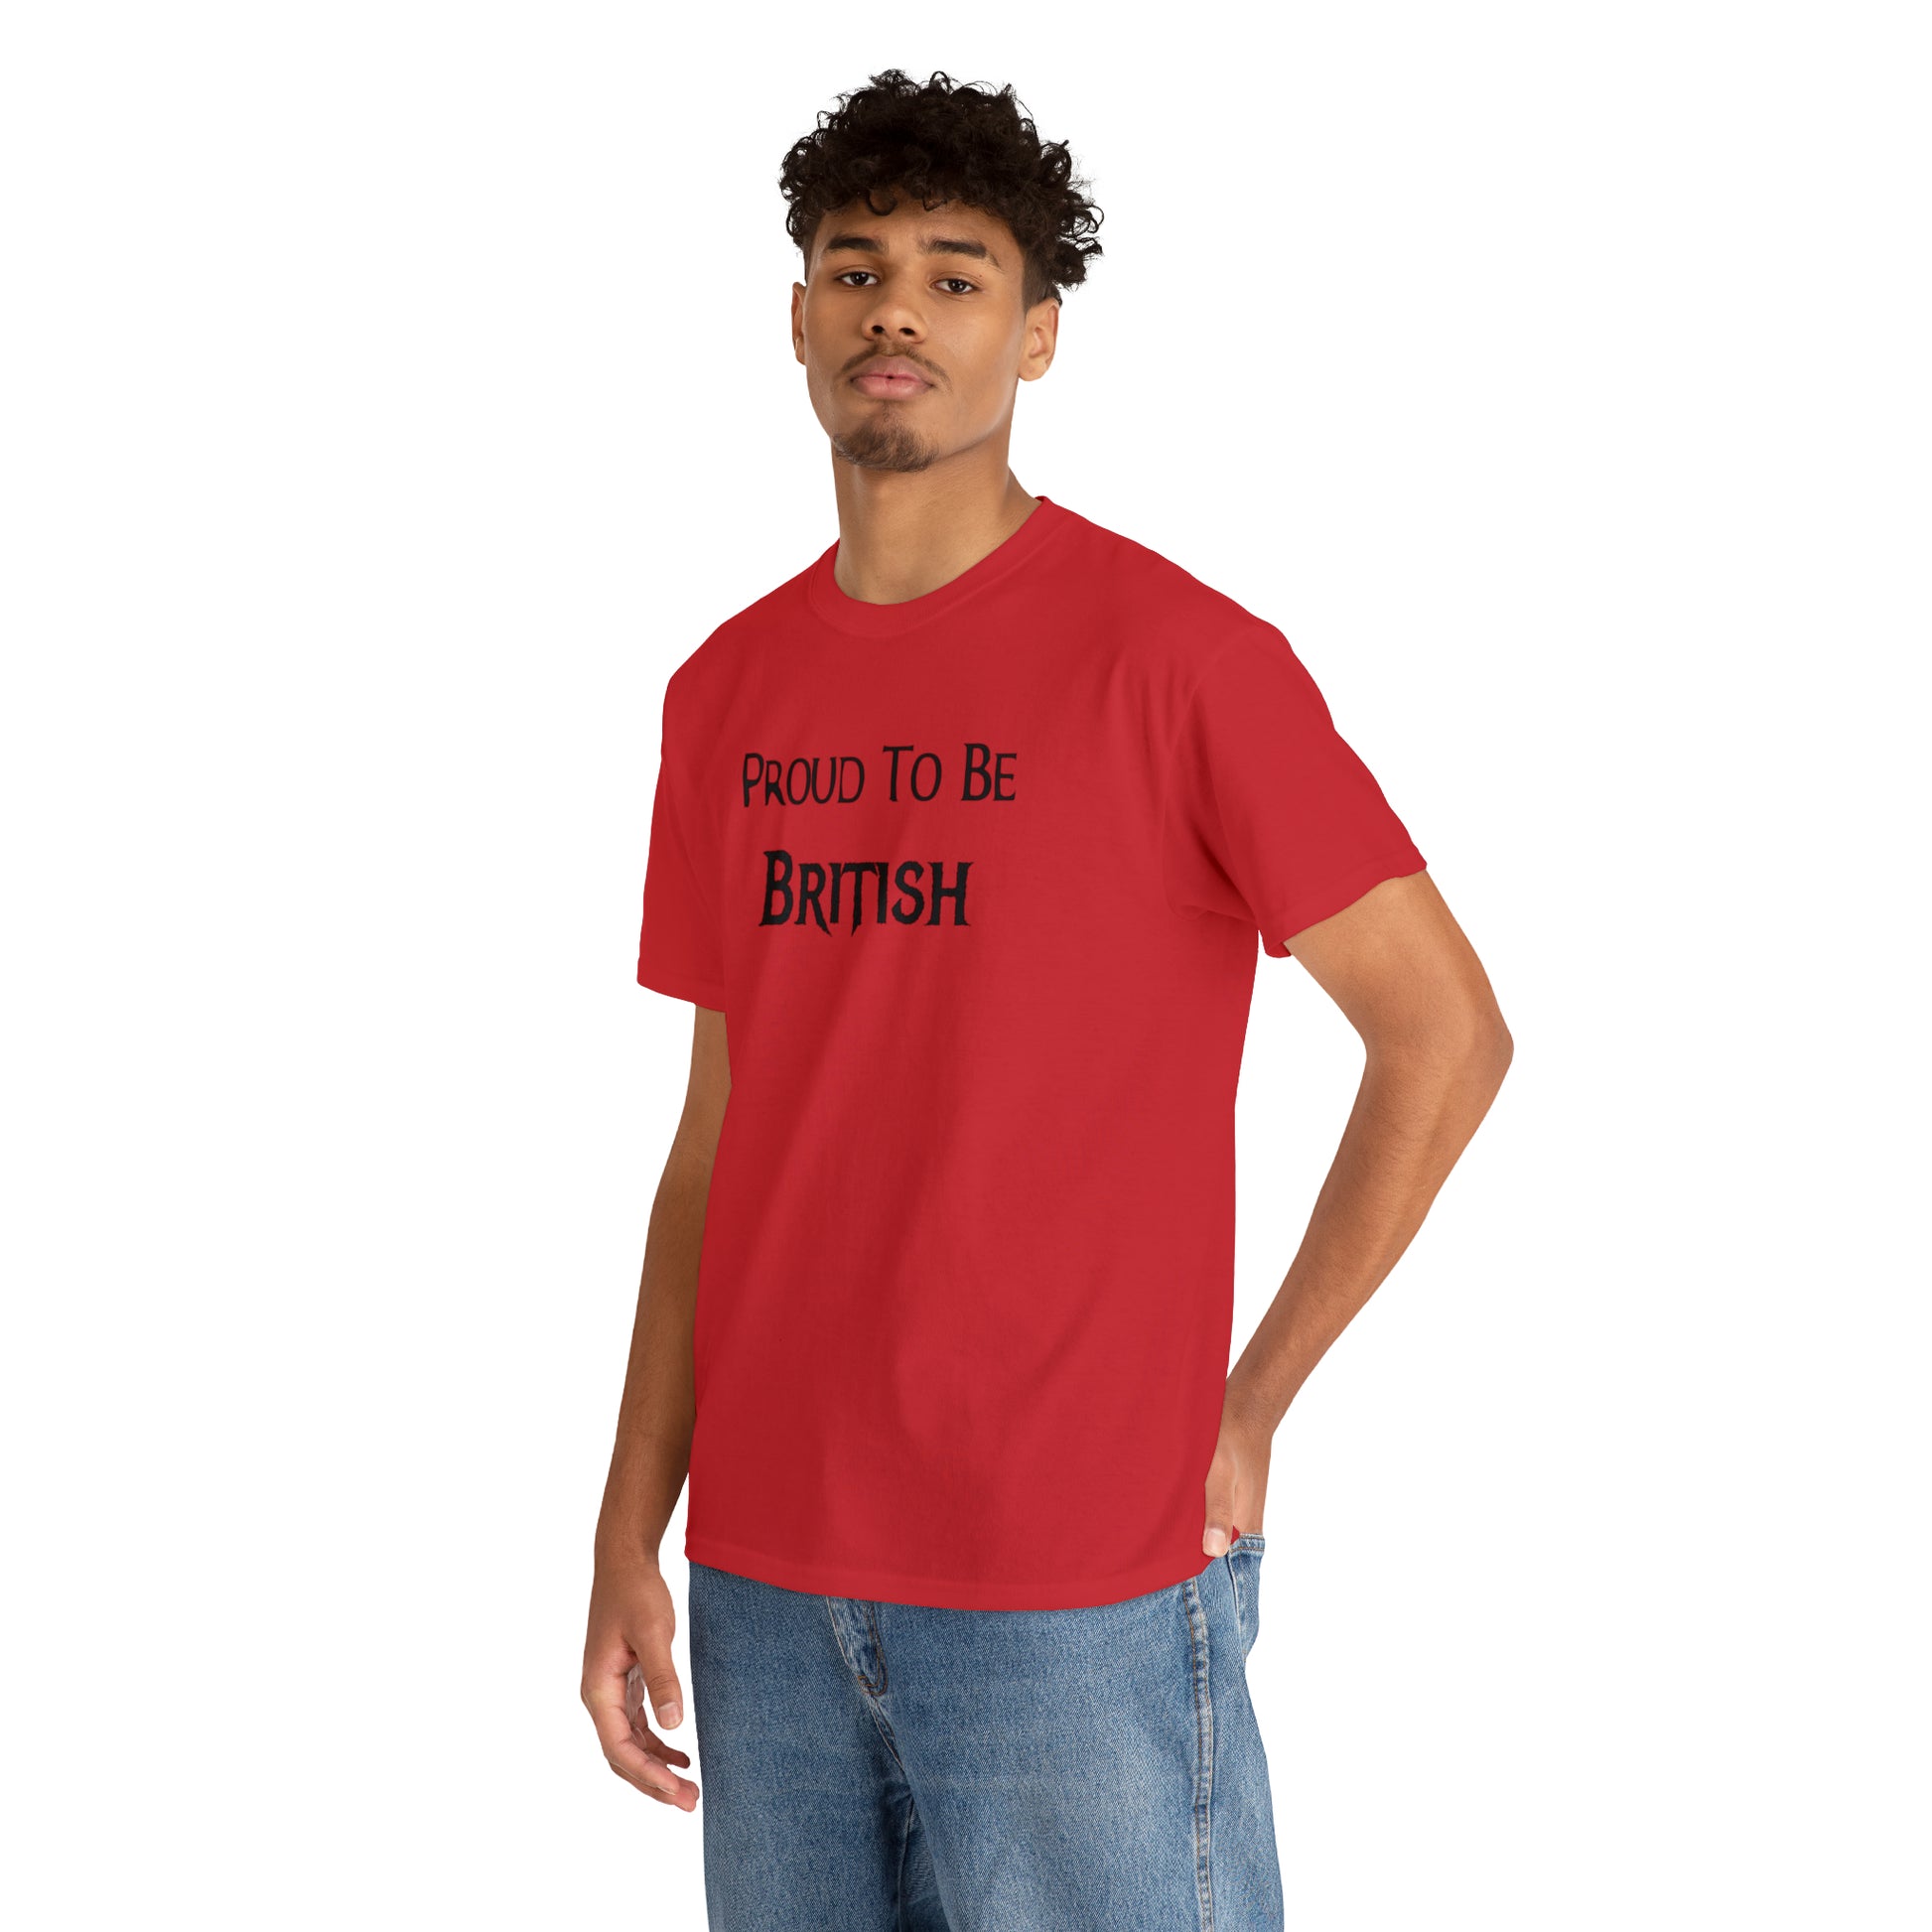 "Proud To Be British" T-Shirt - Weave Got Gifts - Unique Gifts You Won’t Find Anywhere Else!